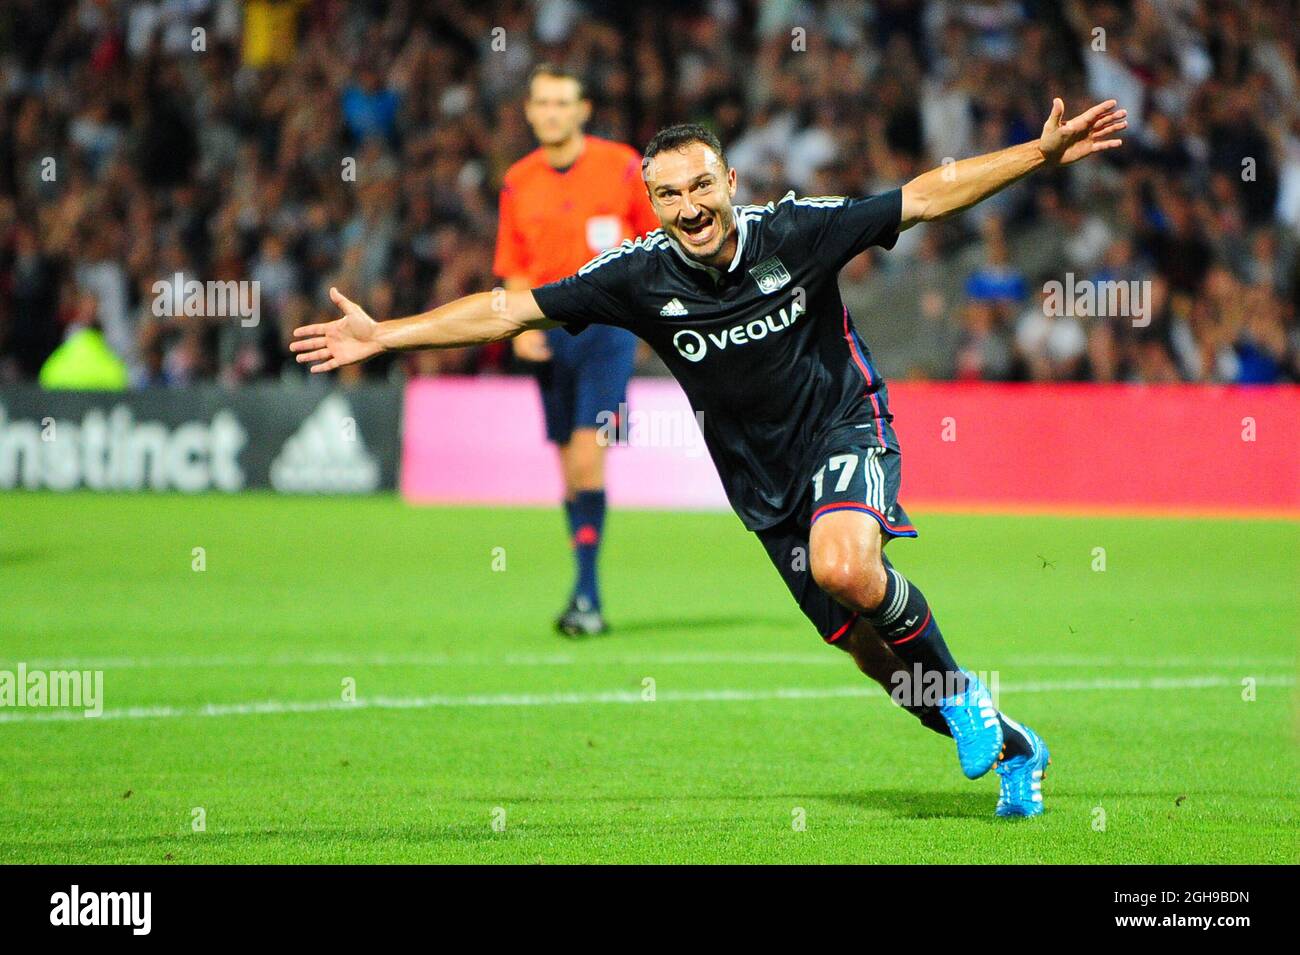 Joie Steed in action during the UEFA Europa League football match between Lyon and Astra at the Gerland Stadium in Lyon, France on August 21, 2014. Photo : Jean Paul Thomas  Icon Sport Stock Photo